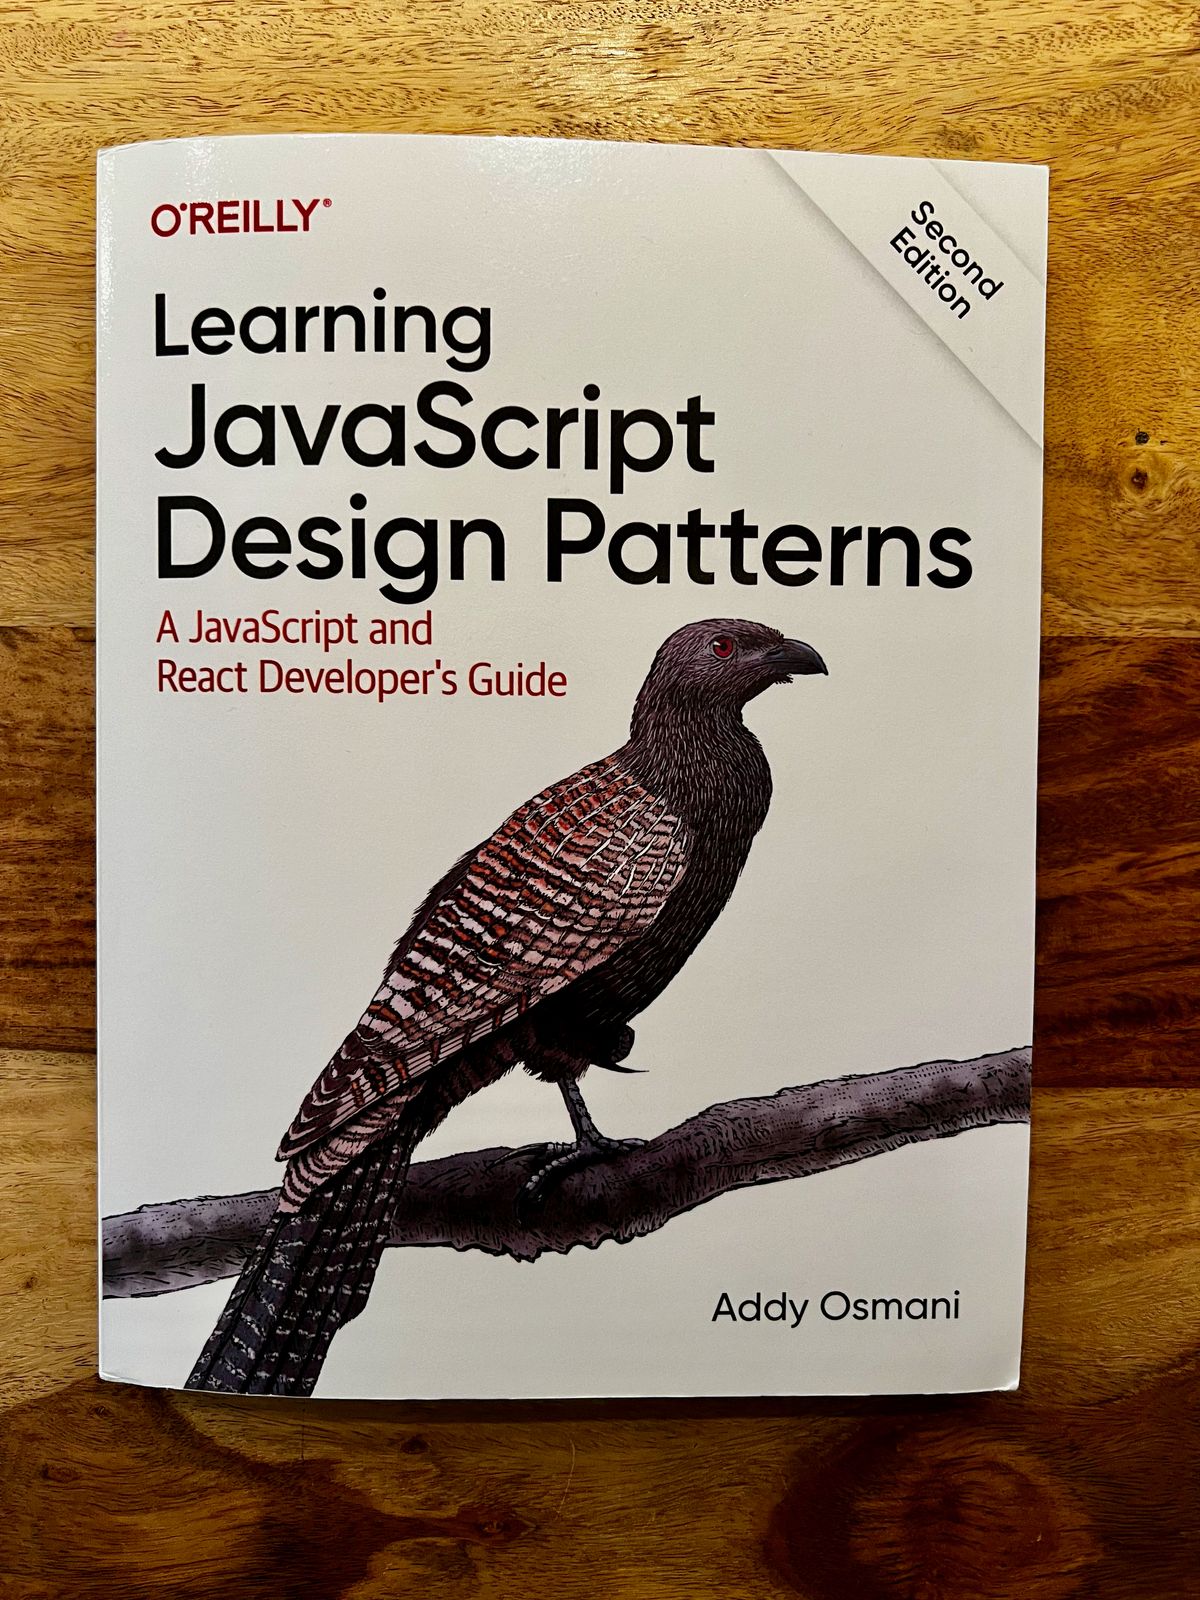 "Learning JavaScript Design Patterns" by Addy Osmani